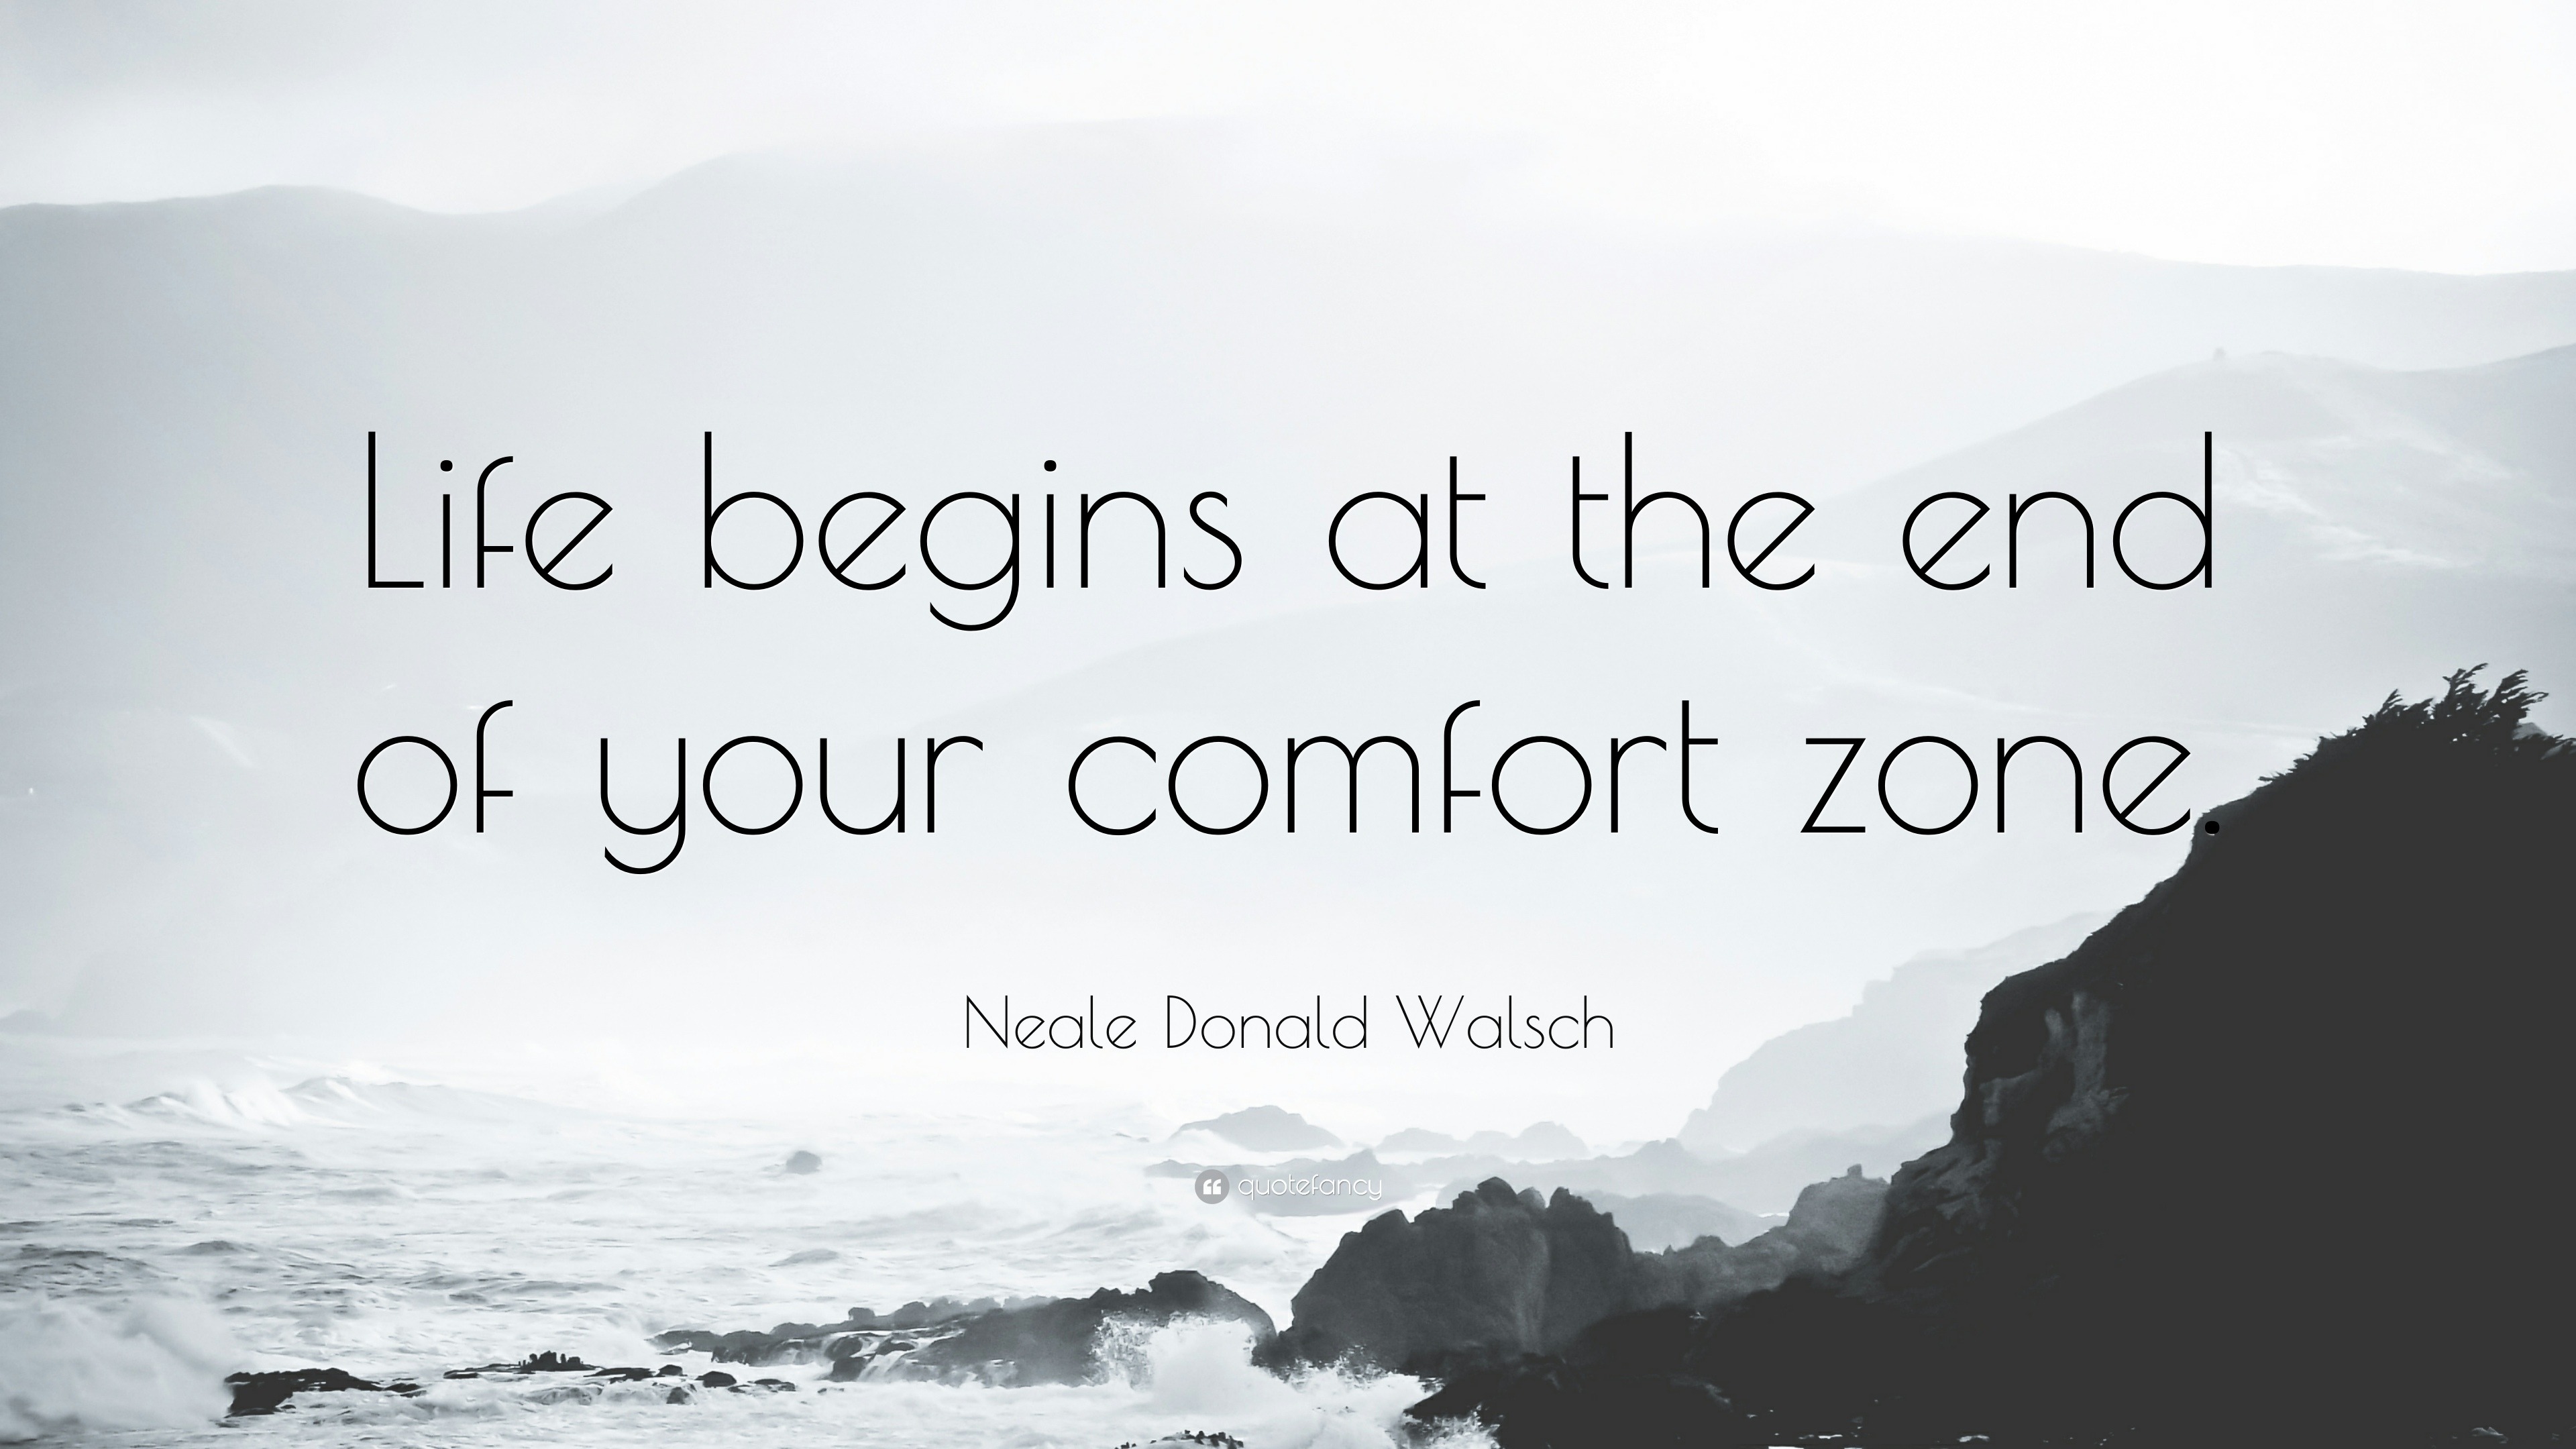 Neale Donald Walsch Quote: “Life begins at the end of your comfort zone